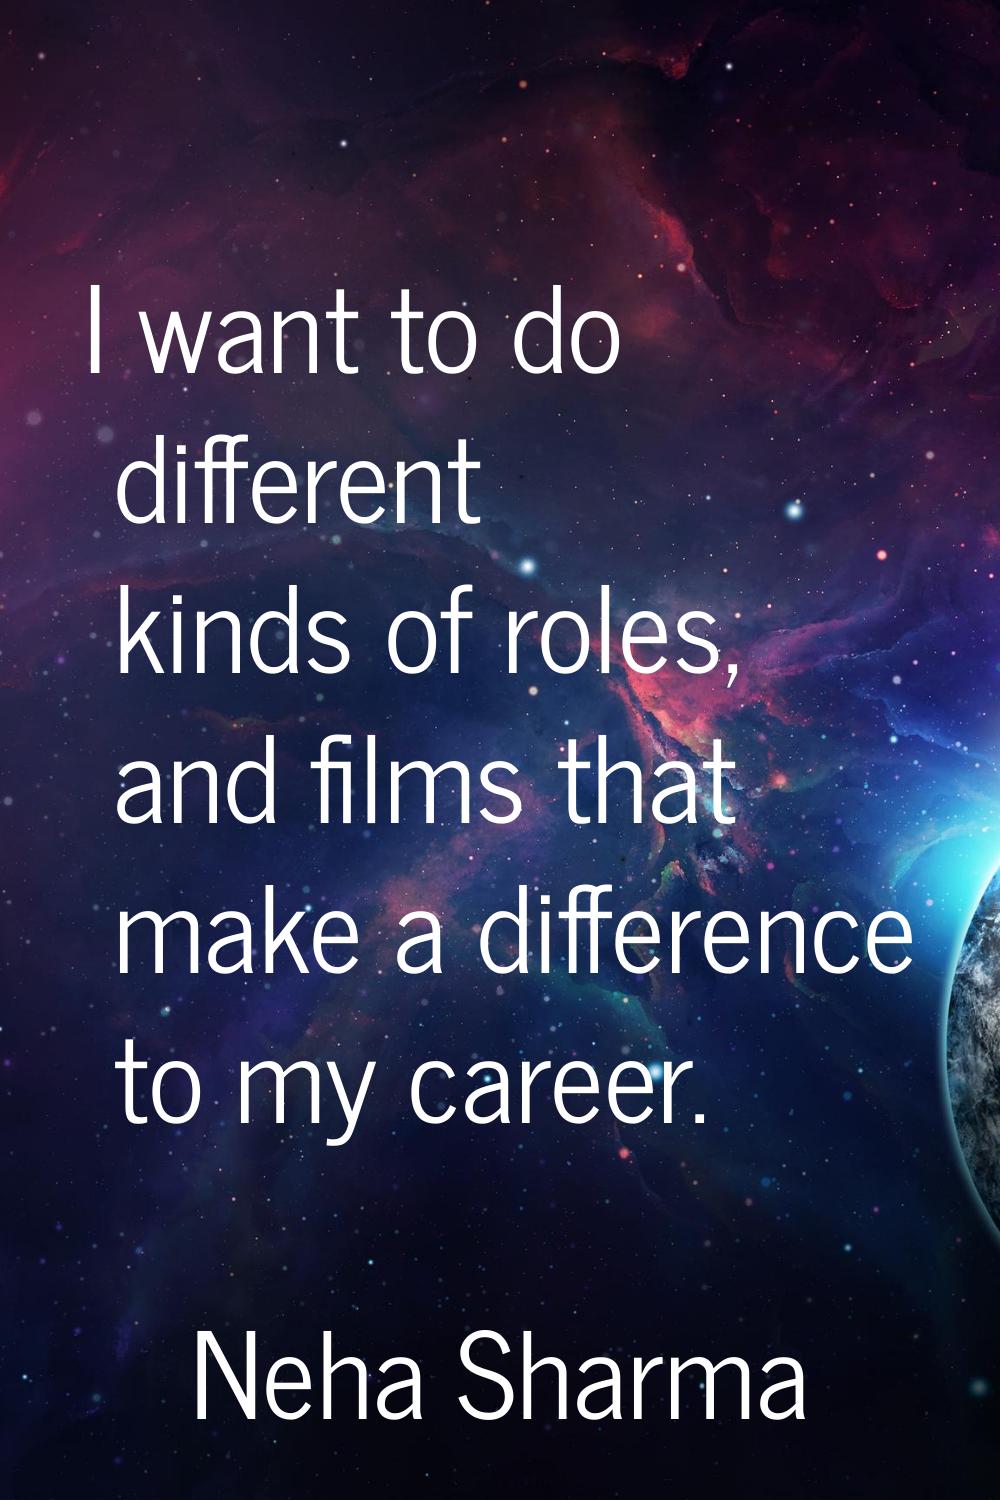 I want to do different kinds of roles, and films that make a difference to my career.